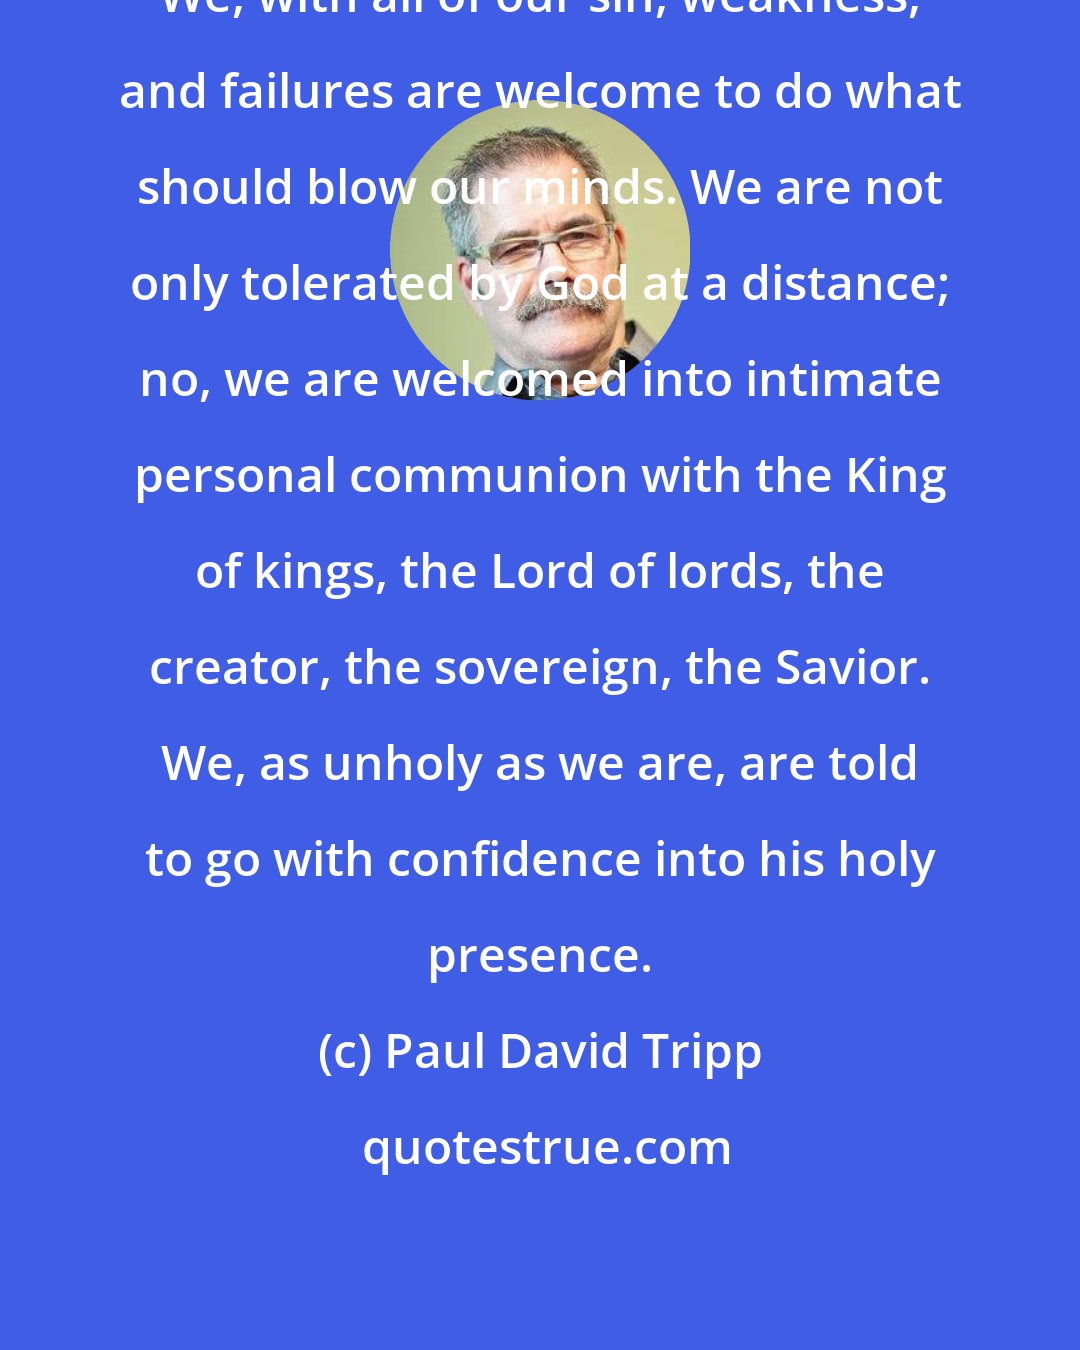 Paul David Tripp: We, with all of our sin, weakness, and failures are welcome to do what should blow our minds. We are not only tolerated by God at a distance; no, we are welcomed into intimate personal communion with the King of kings, the Lord of lords, the creator, the sovereign, the Savior. We, as unholy as we are, are told to go with confidence into his holy presence.